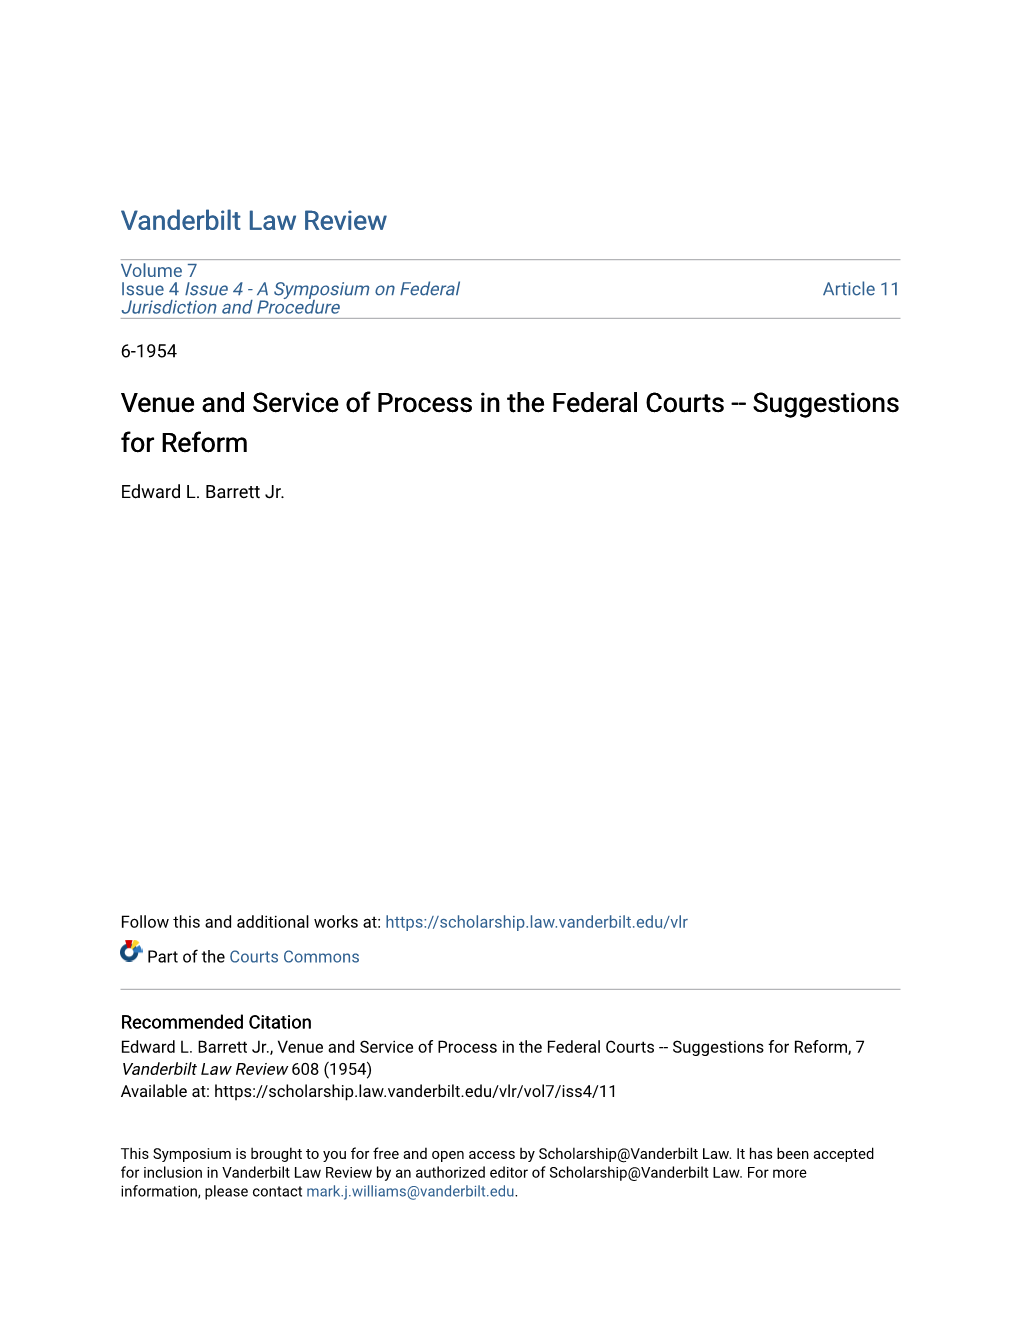 Venue and Service of Process in the Federal Courts -- Suggestions for Reform